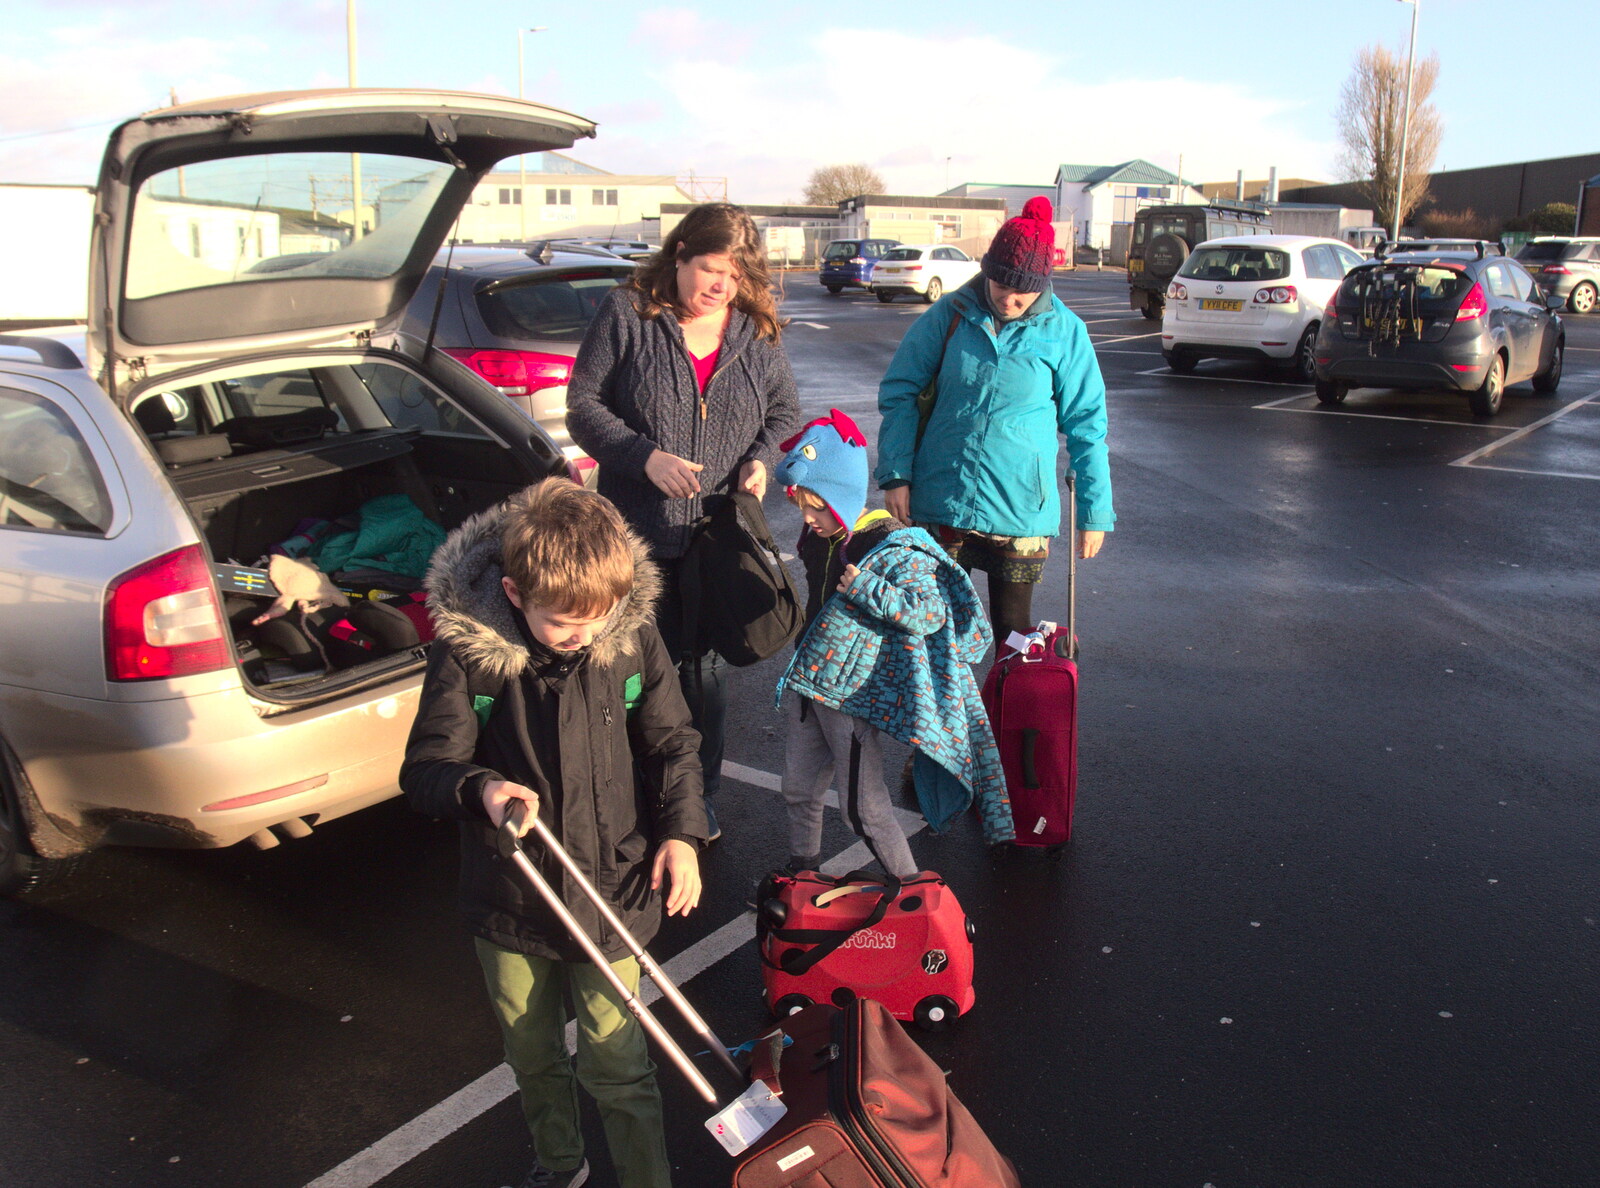 We unload the car at Exeter Airport from New Year's Eve in Spreyton, Devon - 31st December 2017